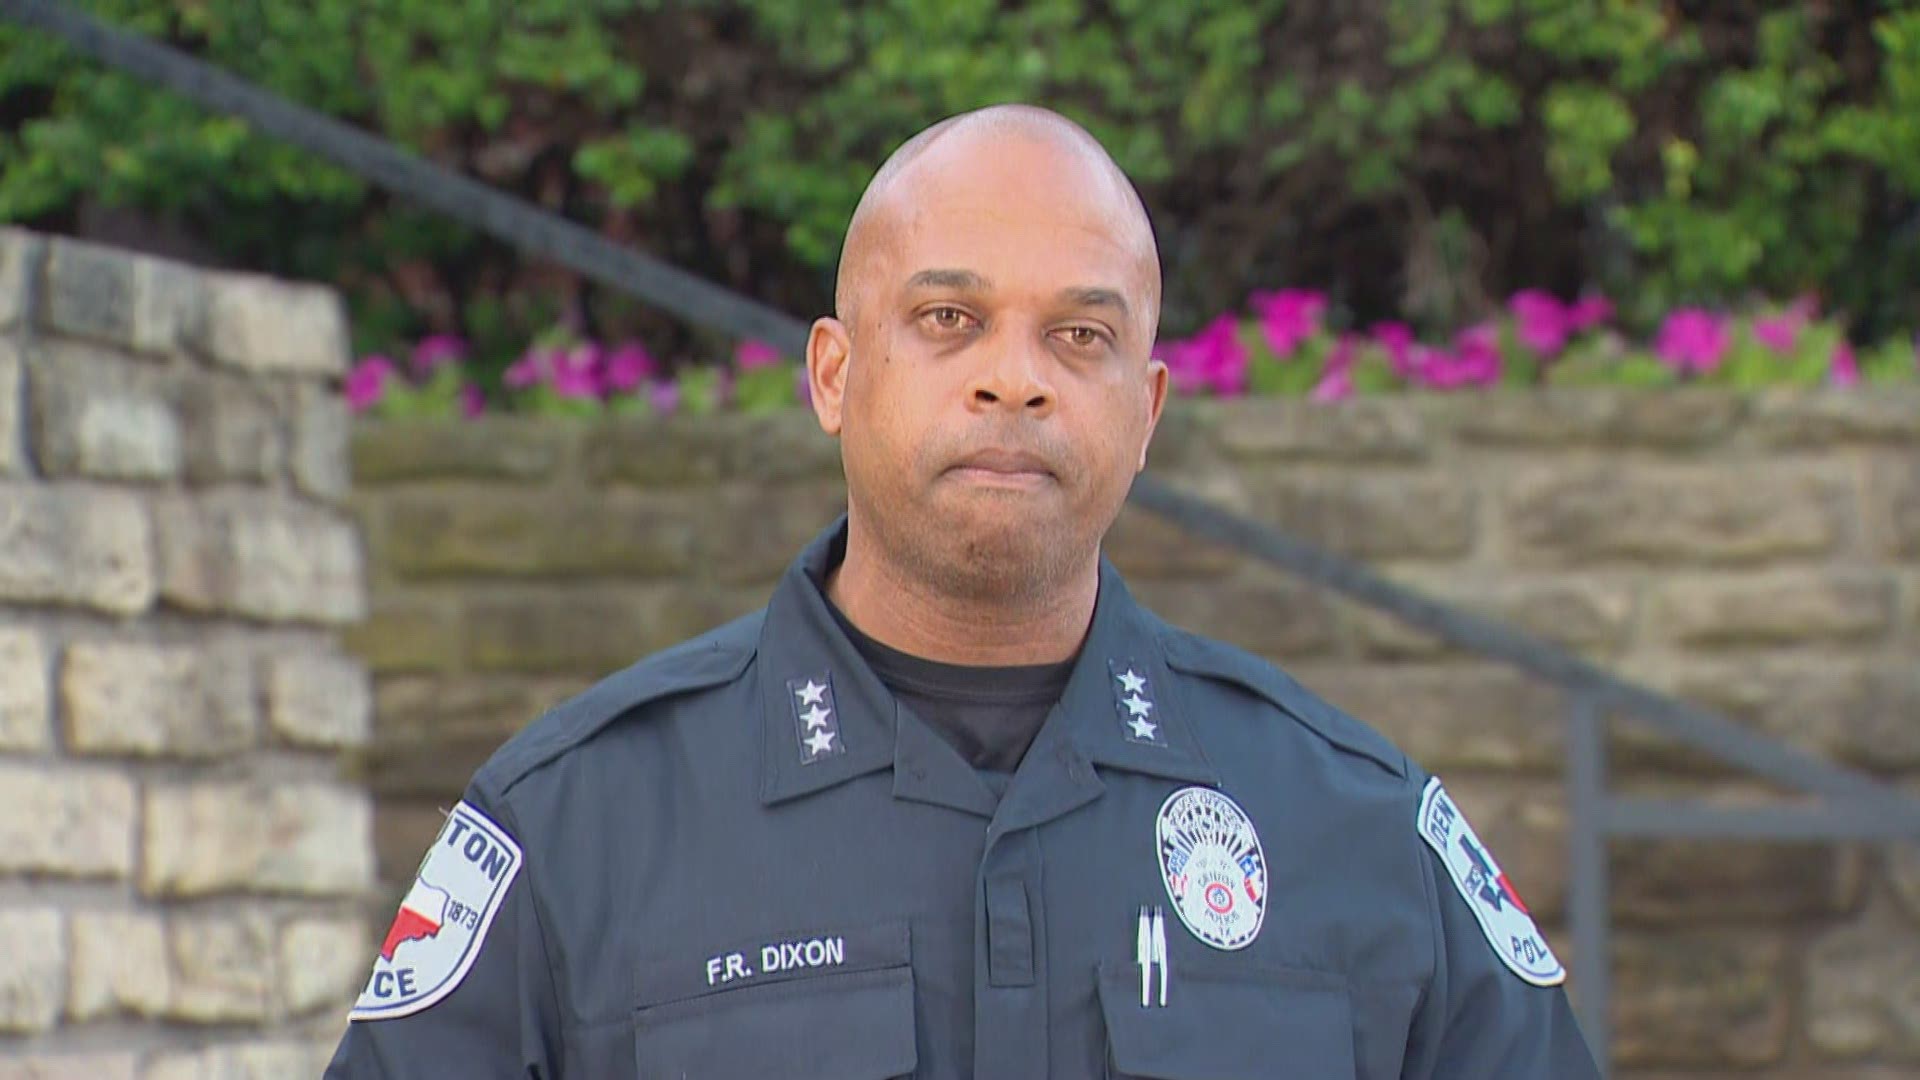 The man had fired at officers while holding a woman to him, Chief Frank Dixon said. He was shot twice by officers.